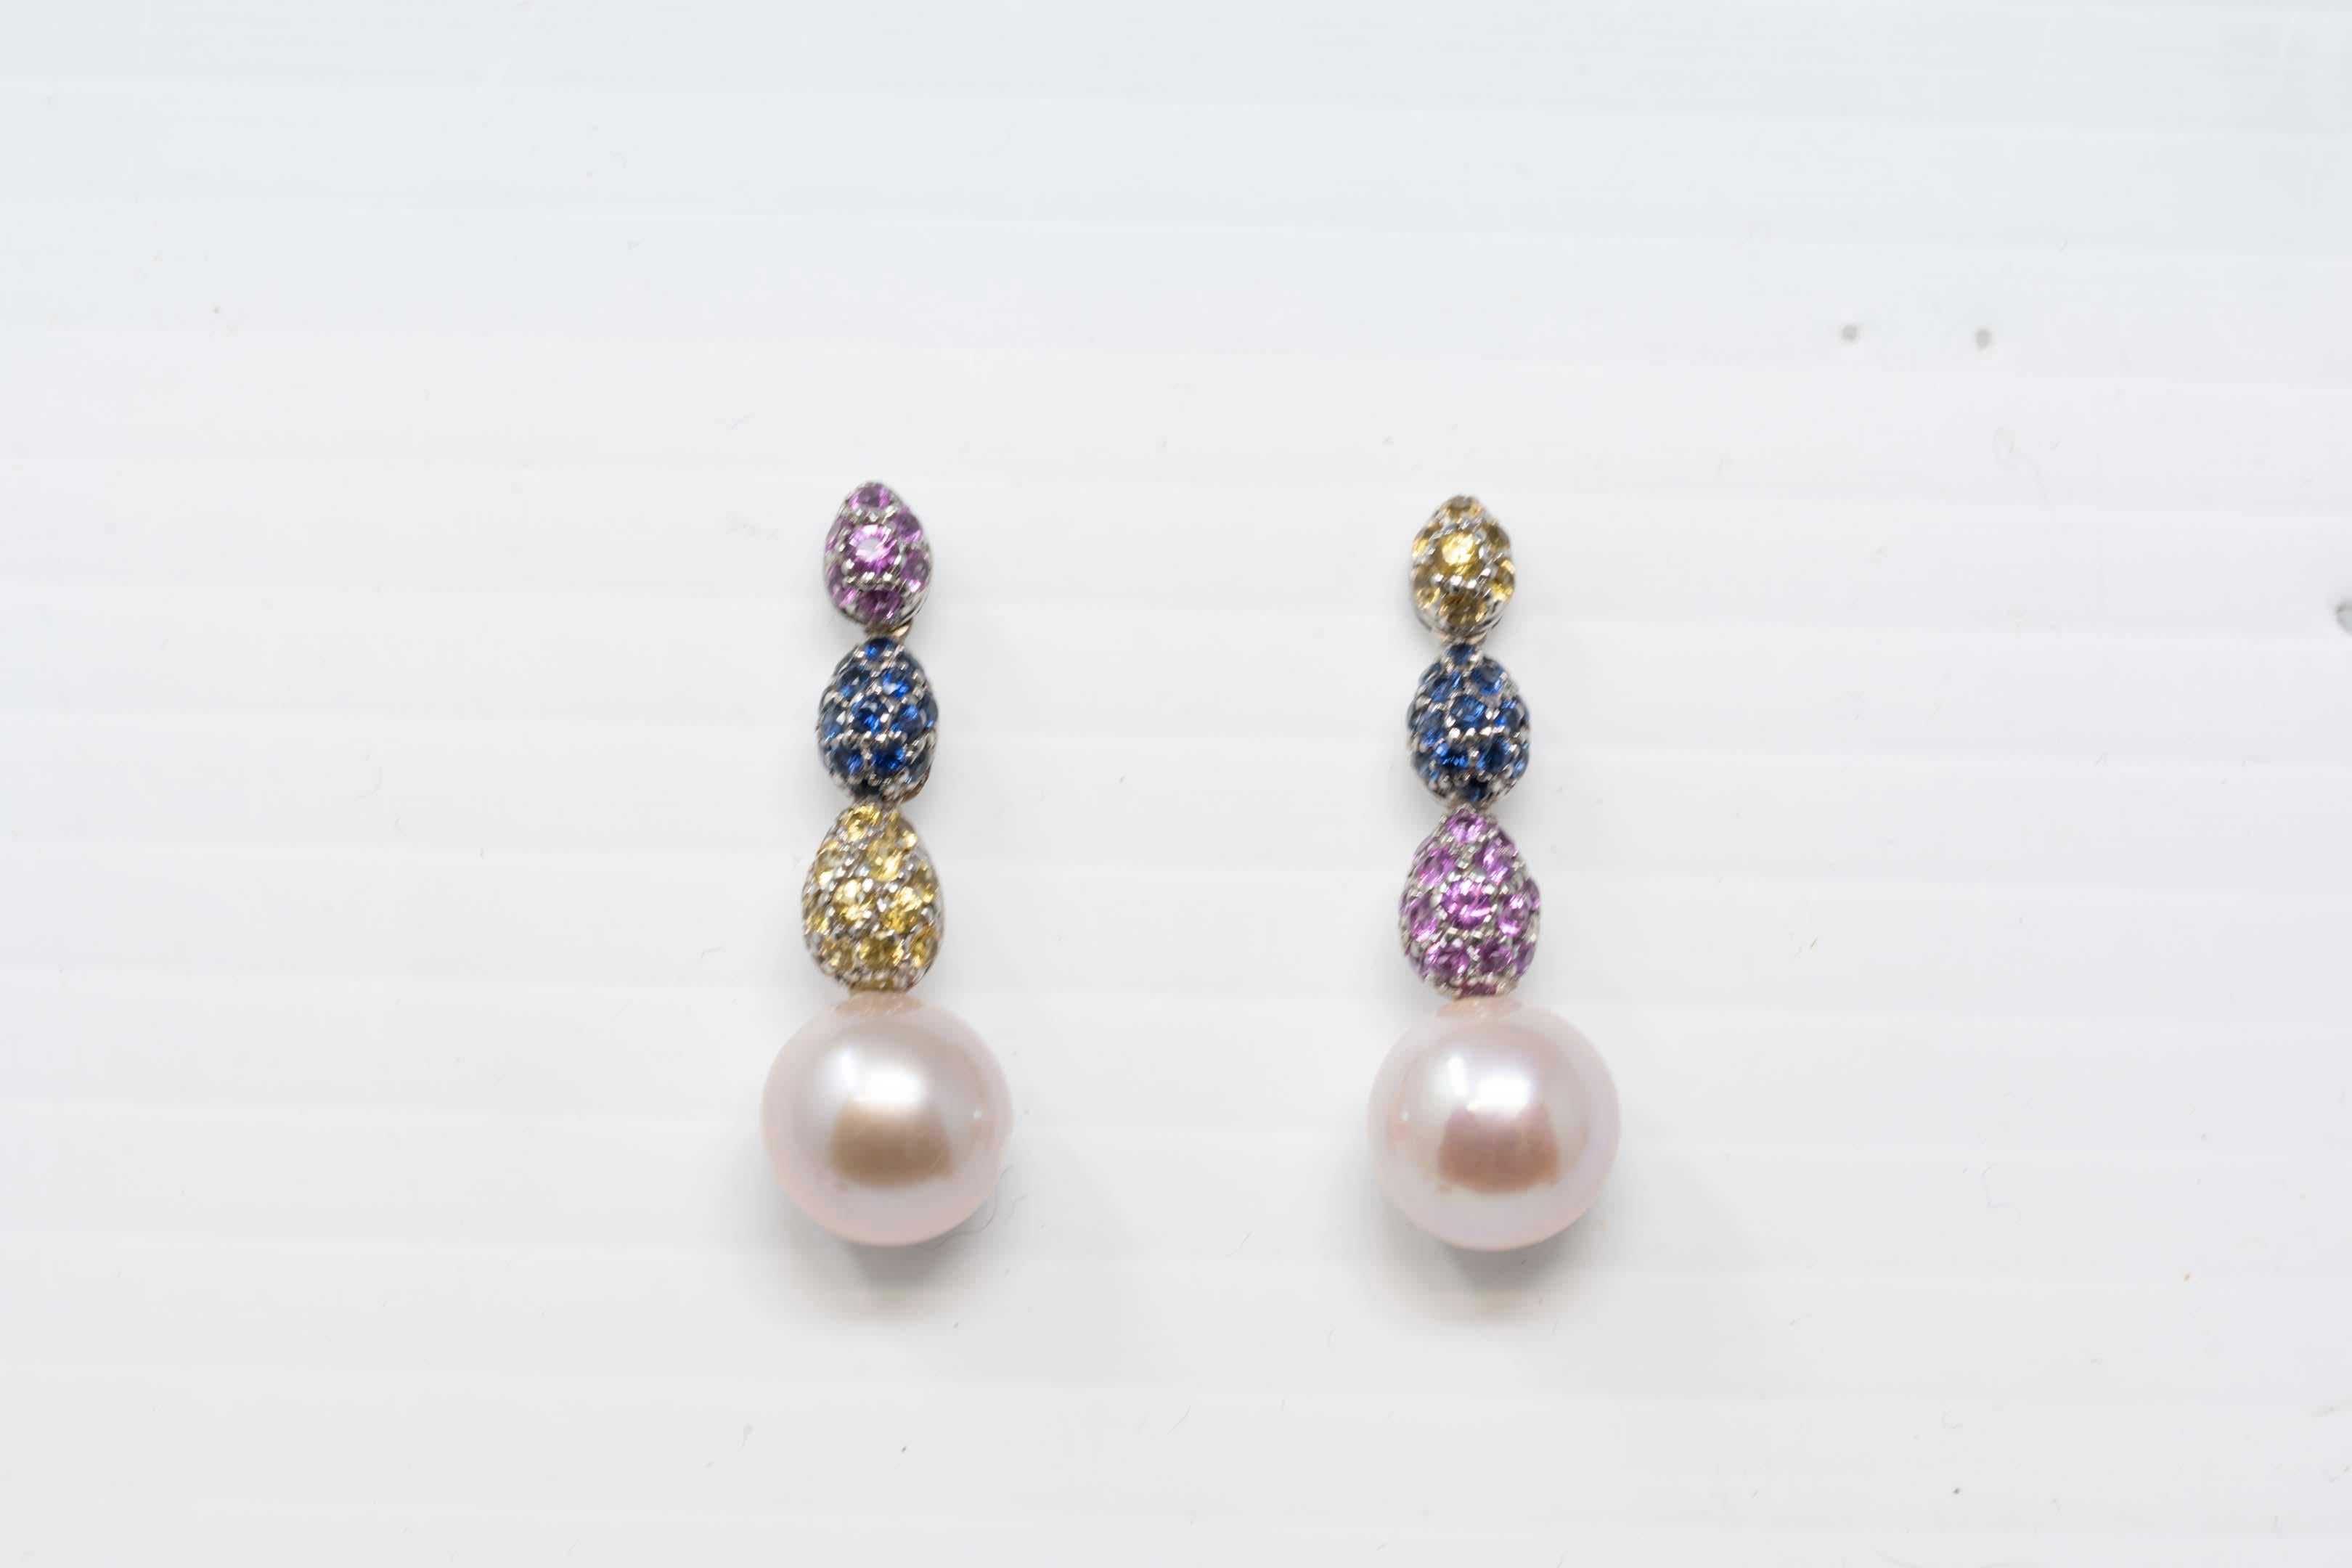 18k white gold earring set with 36 corundum sapphire gemstones pink color, yellow and blue with a cultured pearl measuring 11mm in diameter, about 33mm long. Made in Canada, stamped on the back, 750 and maker SPD (SP Diament Jewels). In good